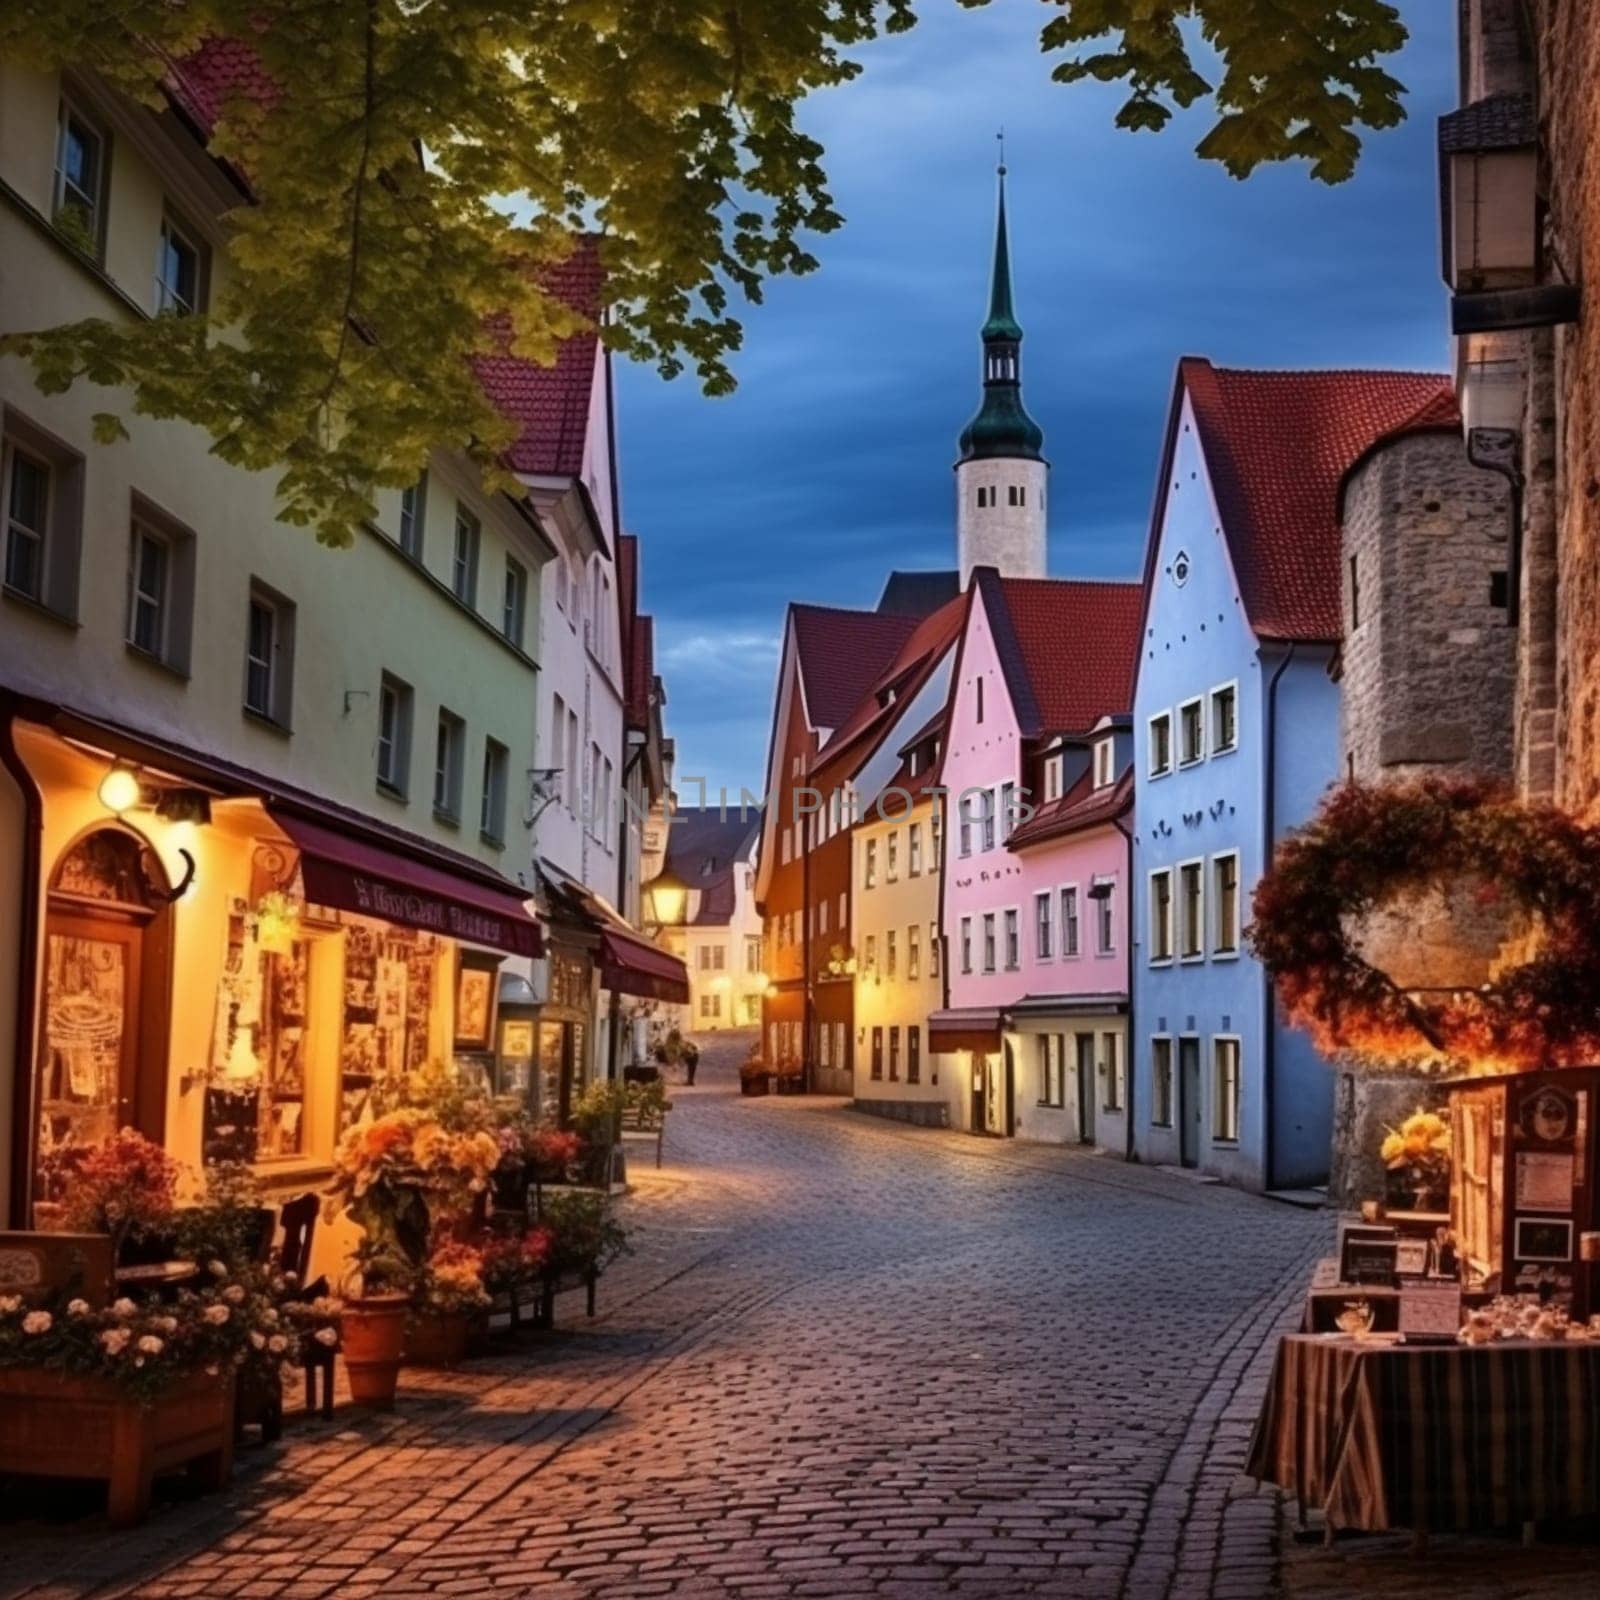 Immerse yourself in the enchanting beauty of Tallinn, the fairytale-like city located in the heart of the Baltics. This captivating image showcases the stunning architecture, ancient castles, and medieval streets that transport viewers to a world of magic and wonder. With a touch of whimsy and mystery, this image will ignite the imagination of those who see it.